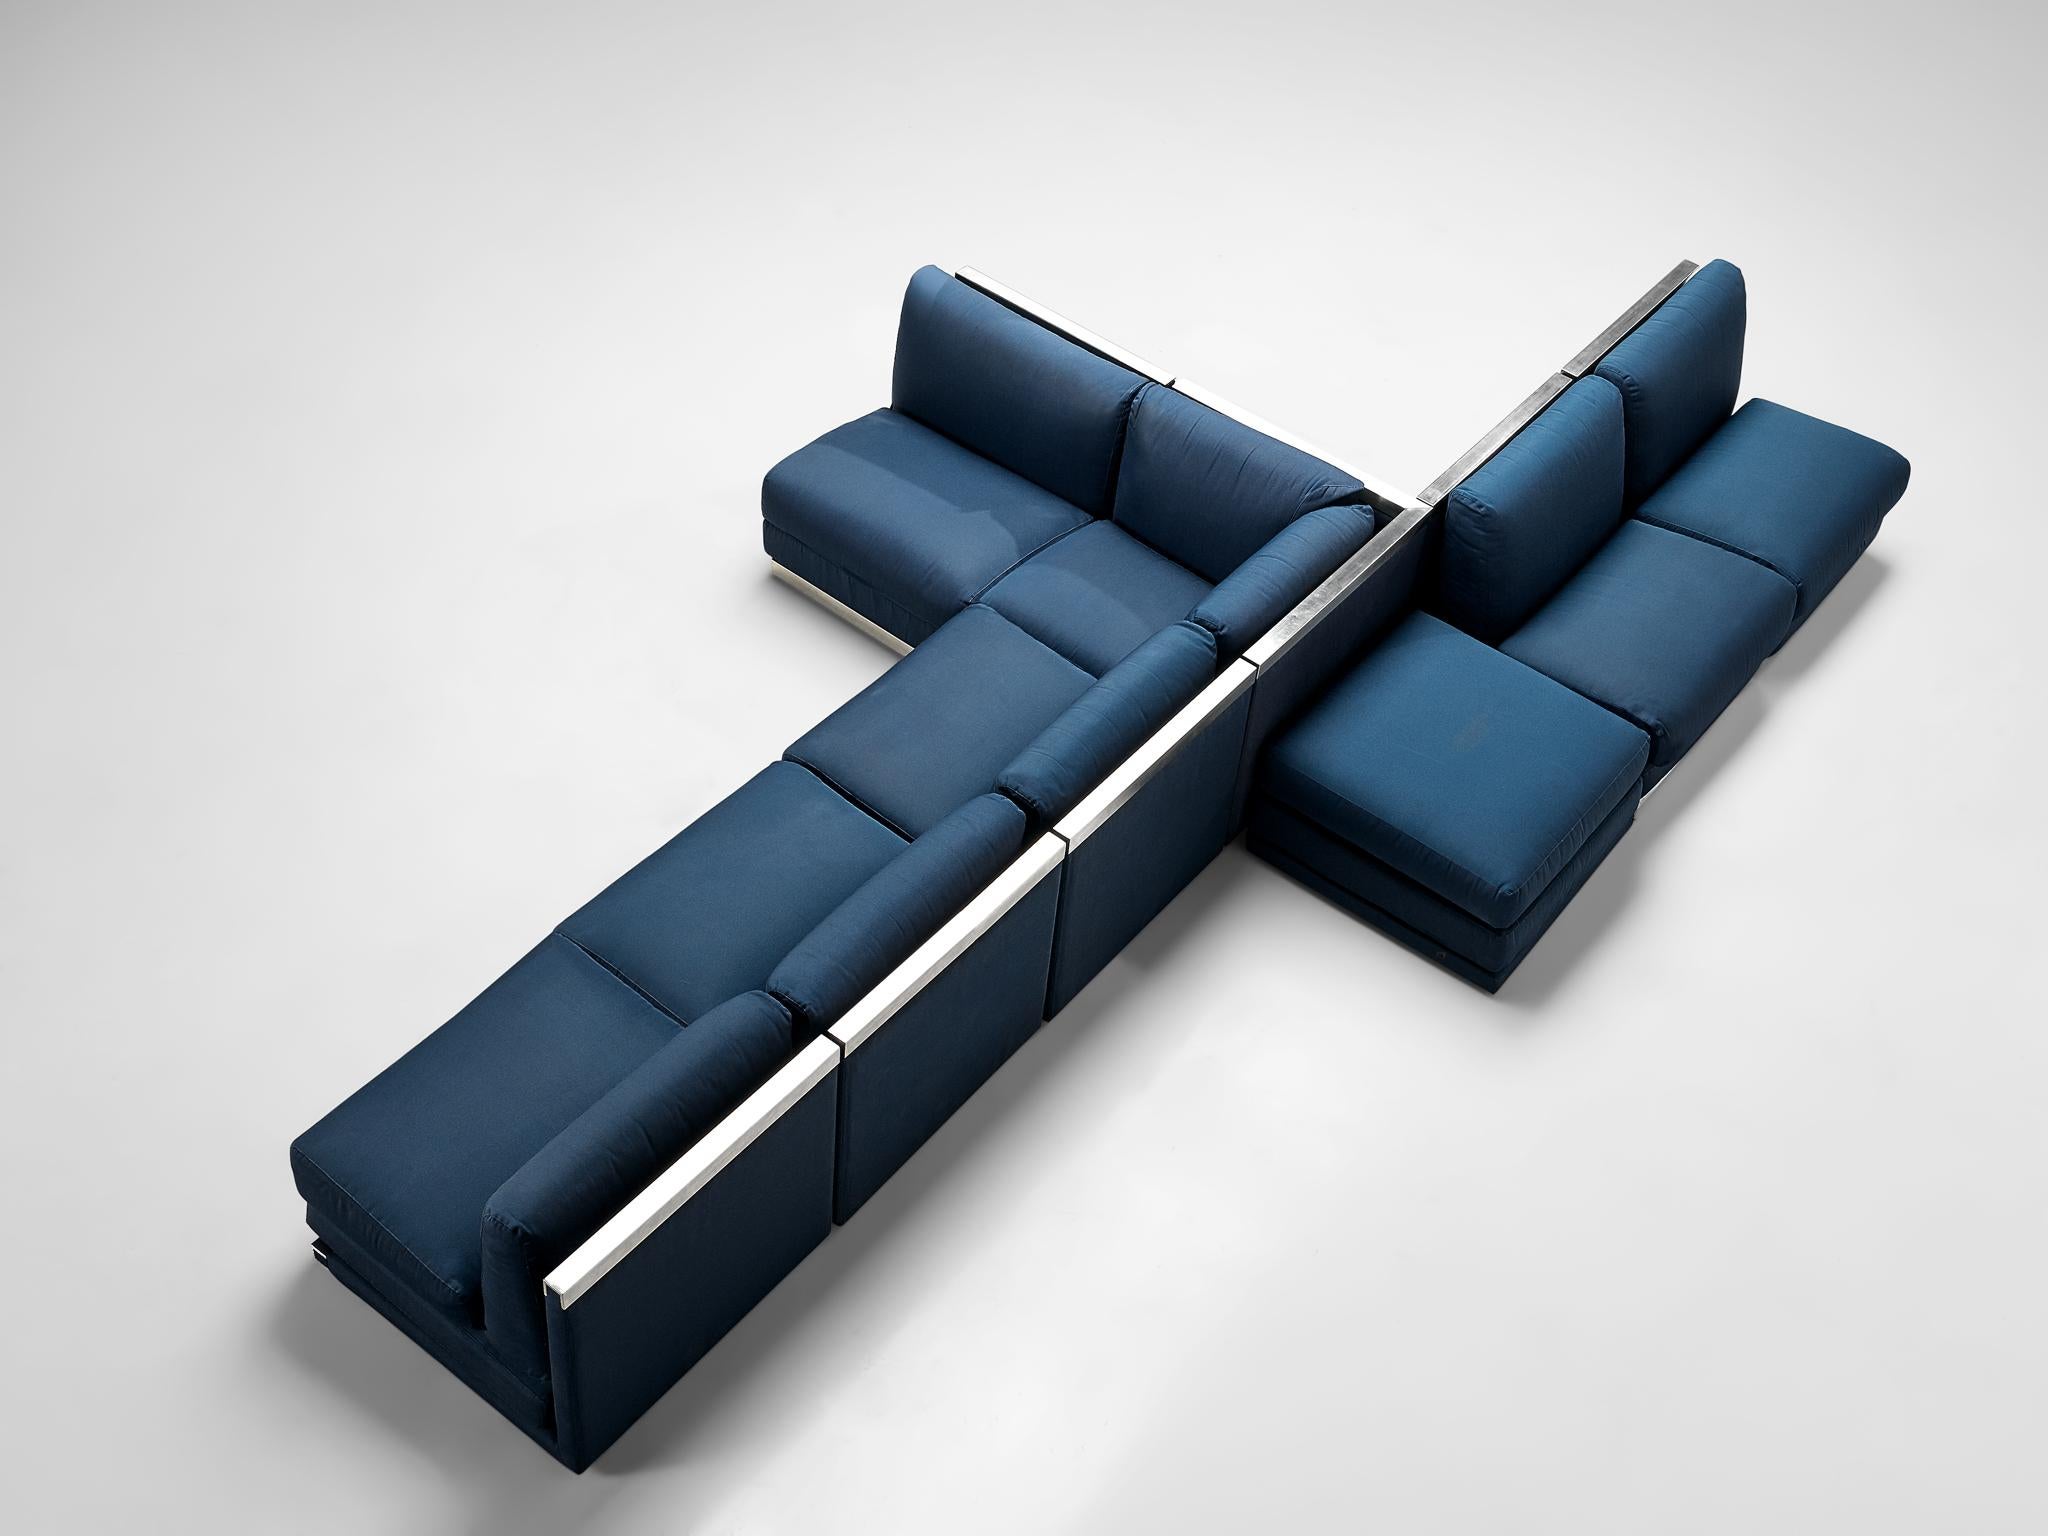 Sectional sofa, cobalt blue fabric upholstery, aluminum, Italy, 1980s

Large Postmodern modular sofa, consisting of six regular seating elements, one corner and an element without backrest usable as a side table or ottoman. A perfect piece to place